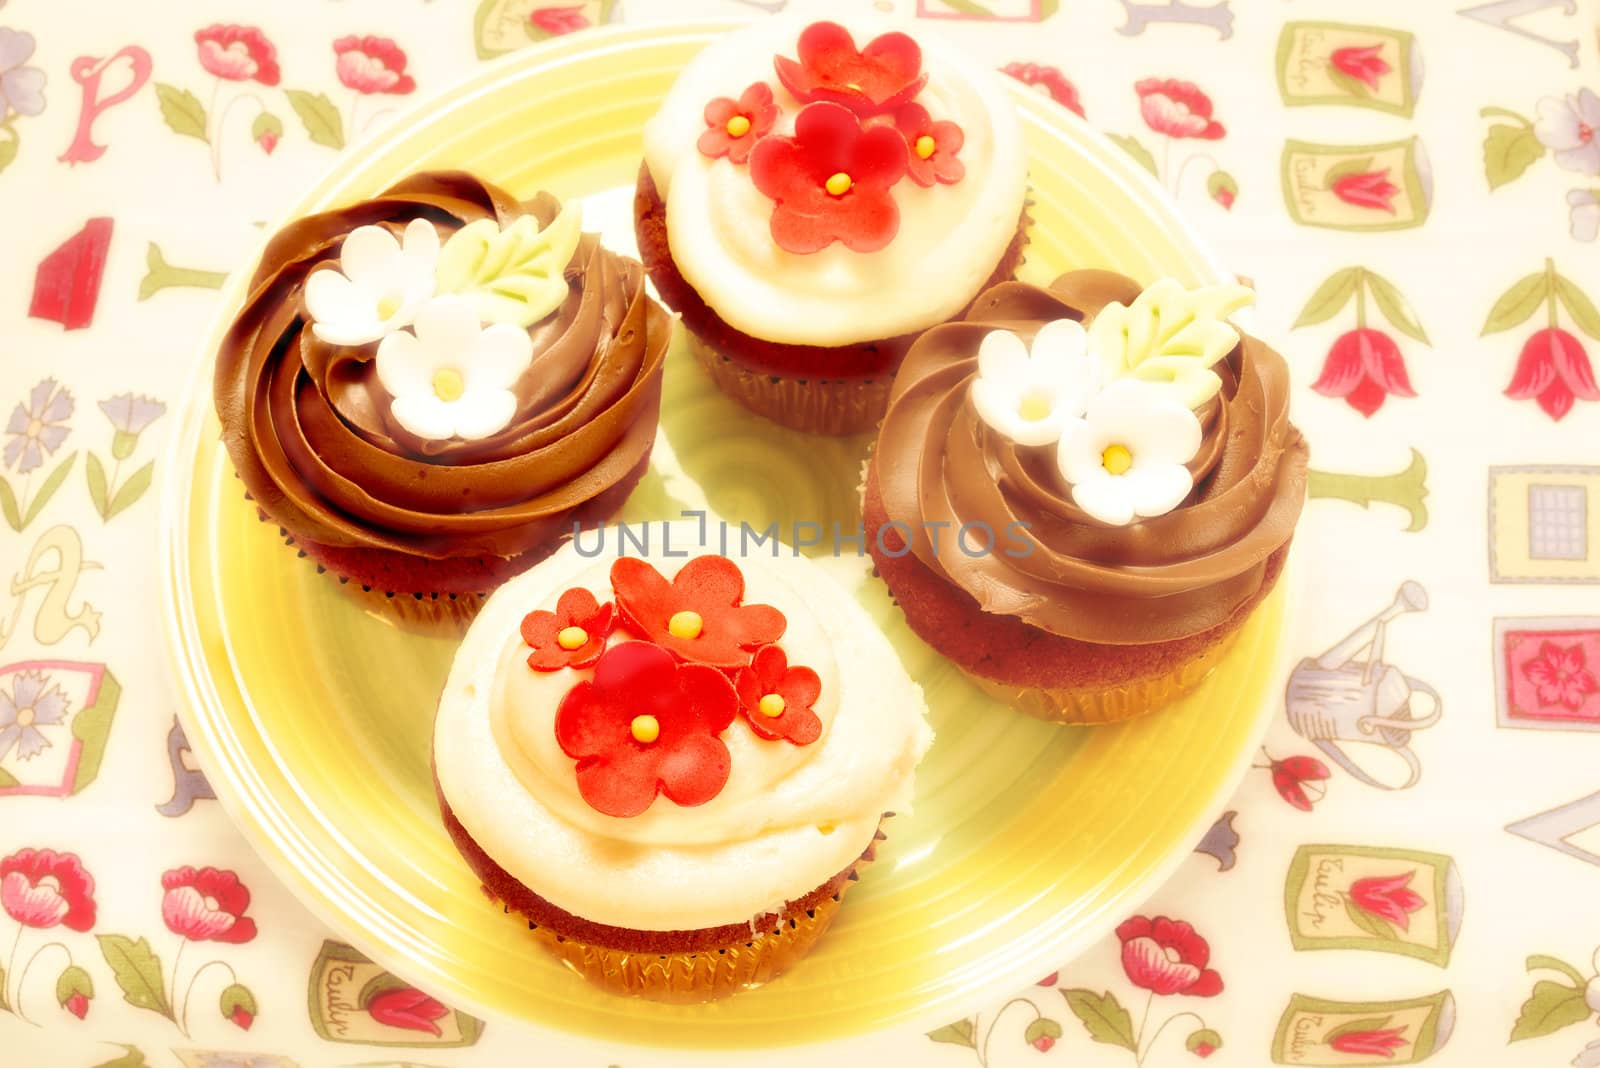 four delicious cupcakes decorated by Carche